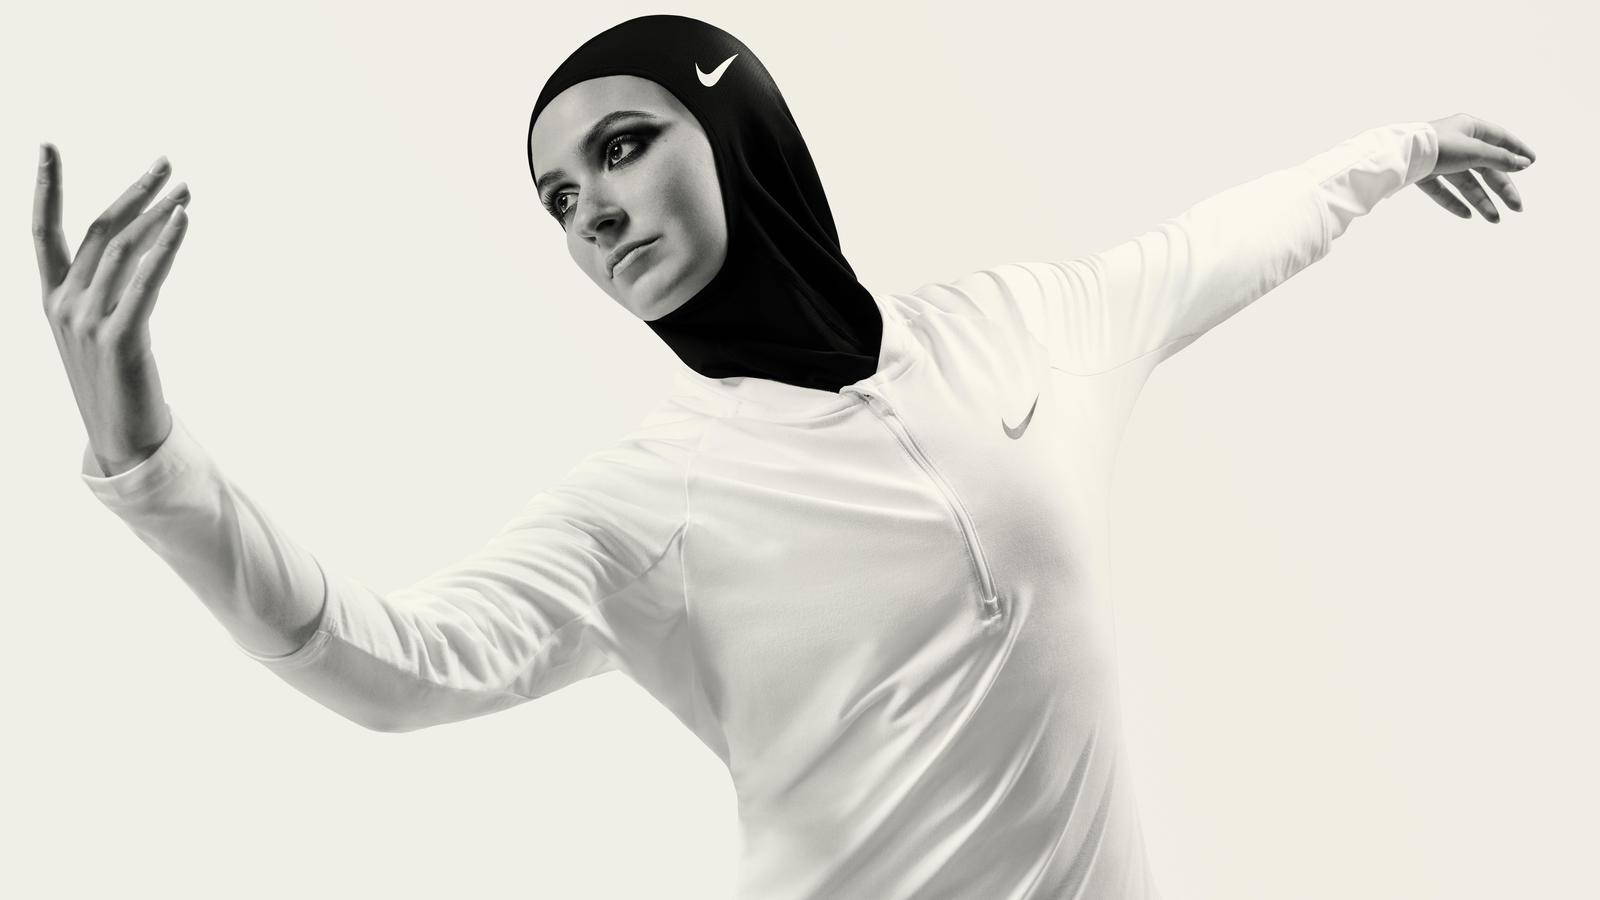 Nike Reveals The Pro Hijab For Muslim Athletes The New York Times Uk